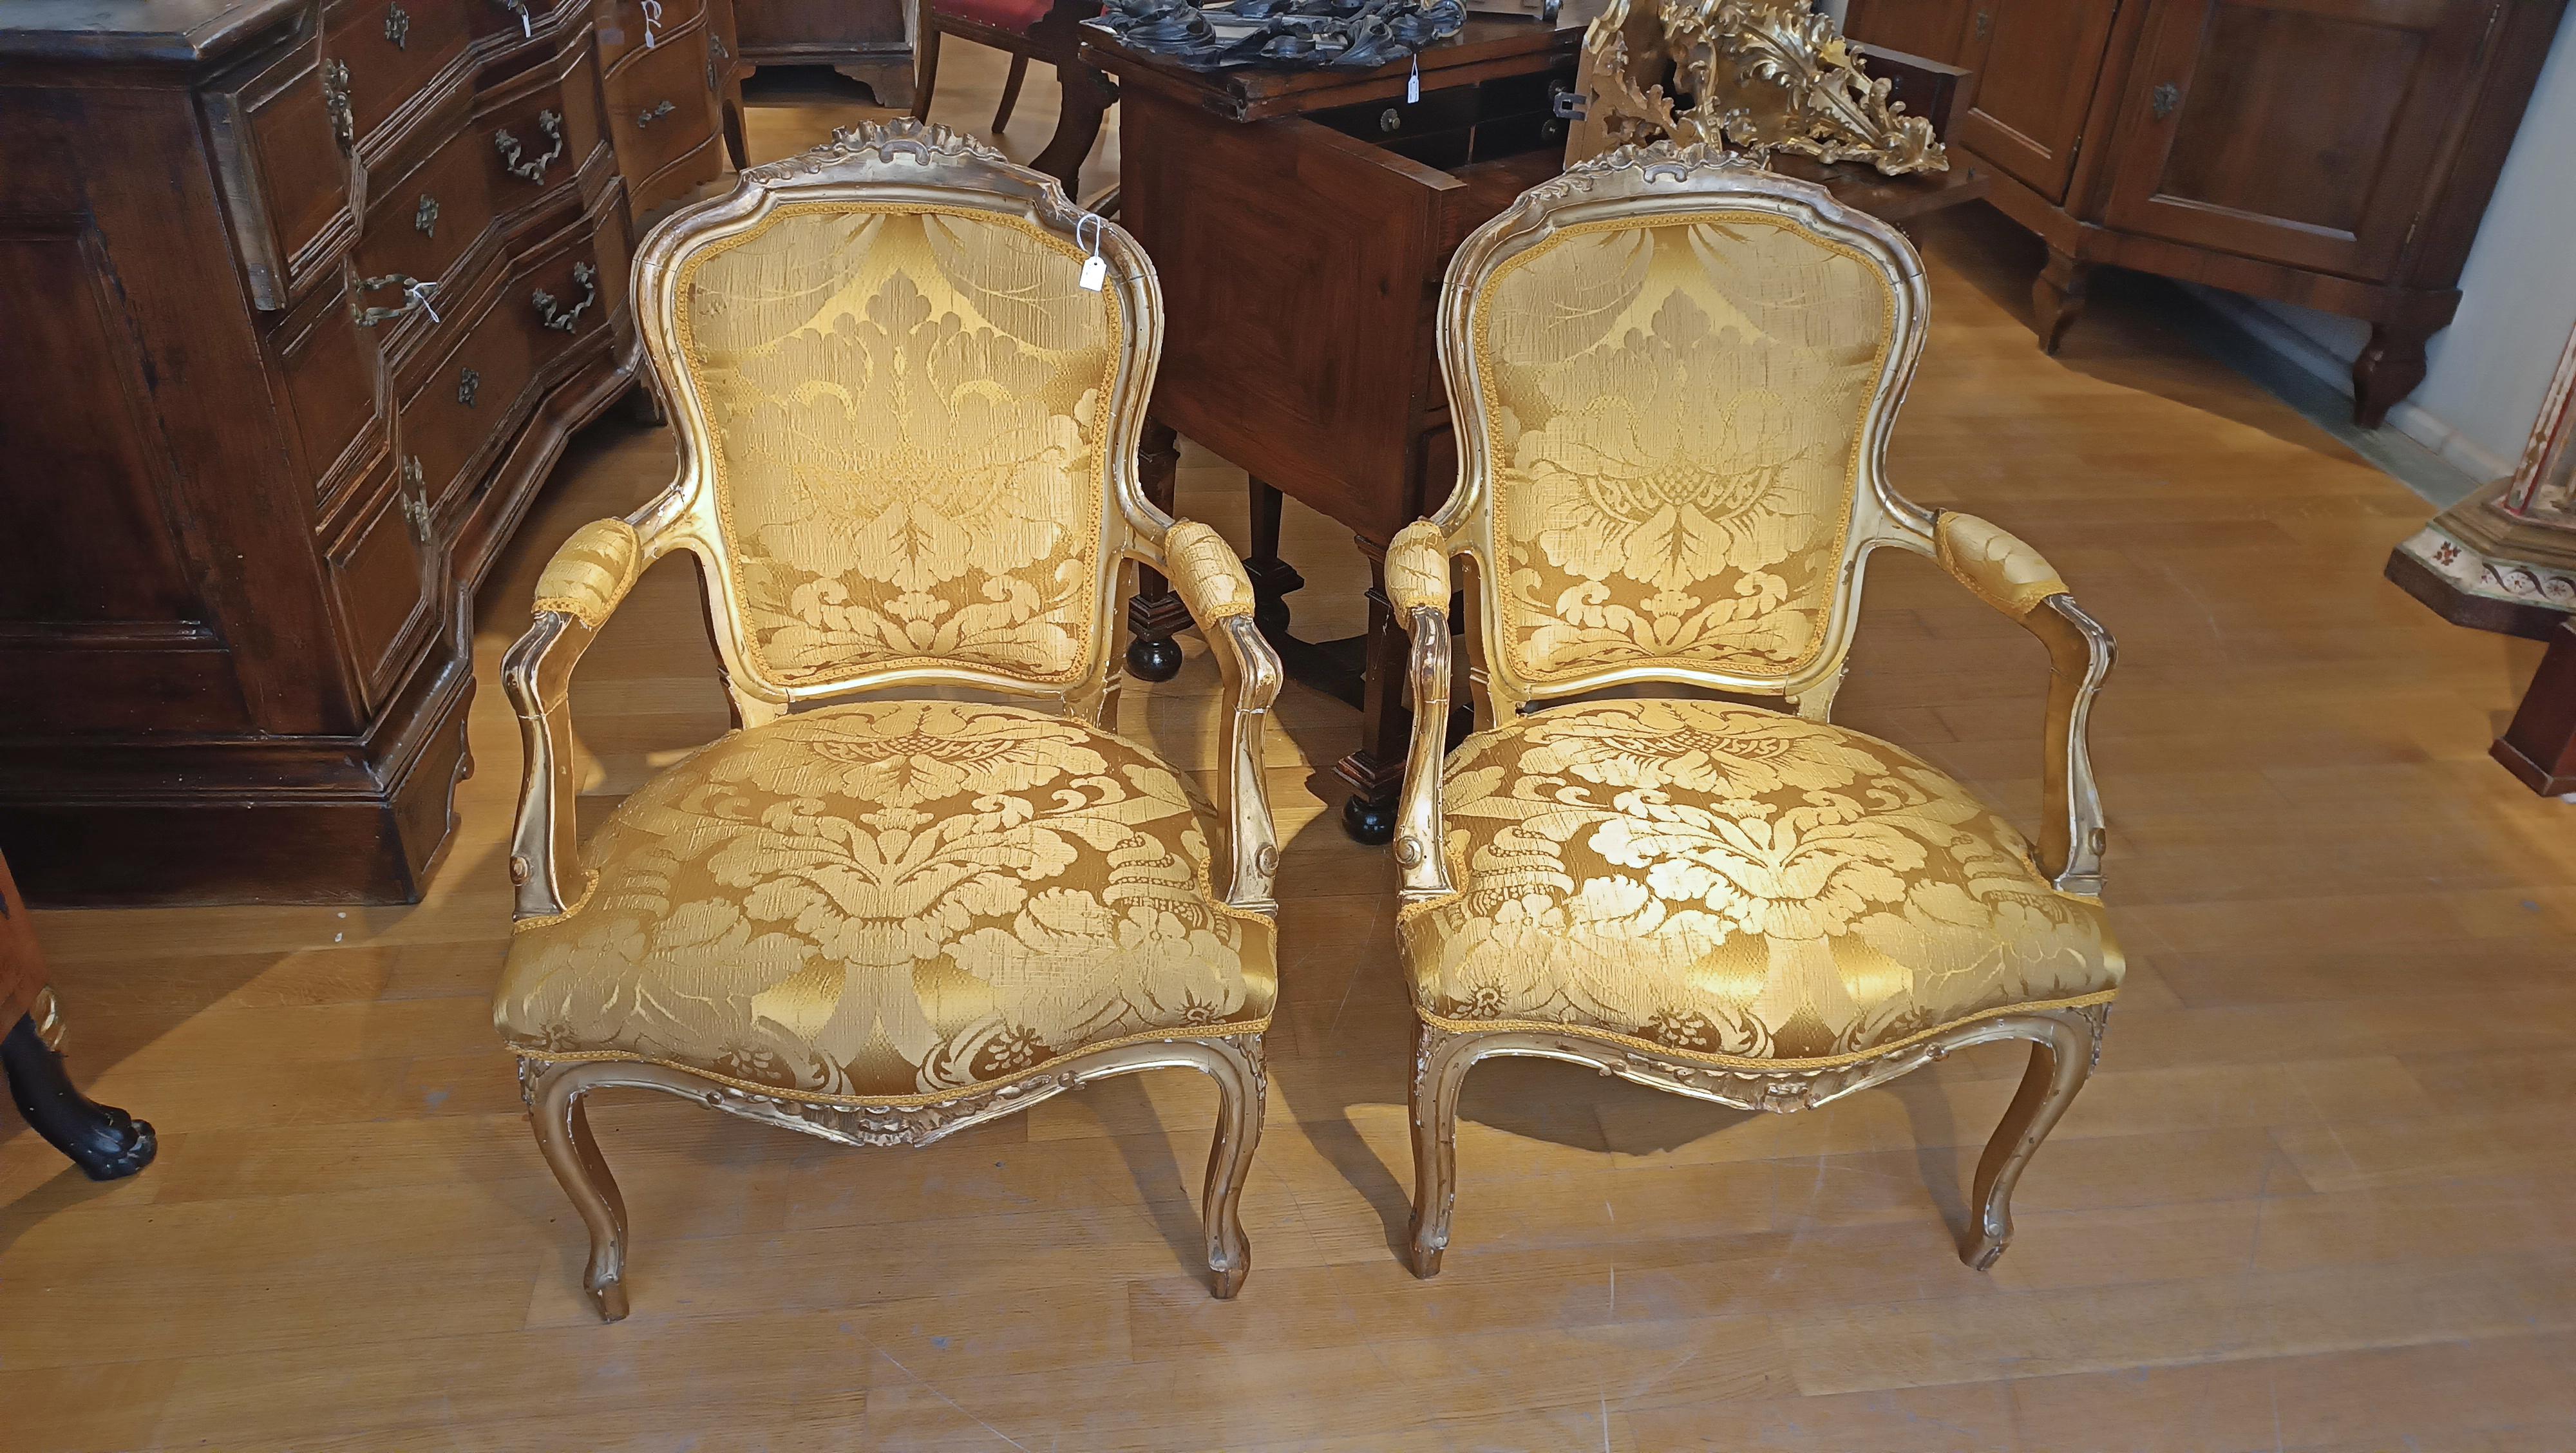 These armchairs in carved pine wood and gilded with gold leaf represent a fine example of Tuscan craftsmanship in eighteenth-century style. The armchairs are characterized by a wavy style that gives them elegance and refinement. The carving